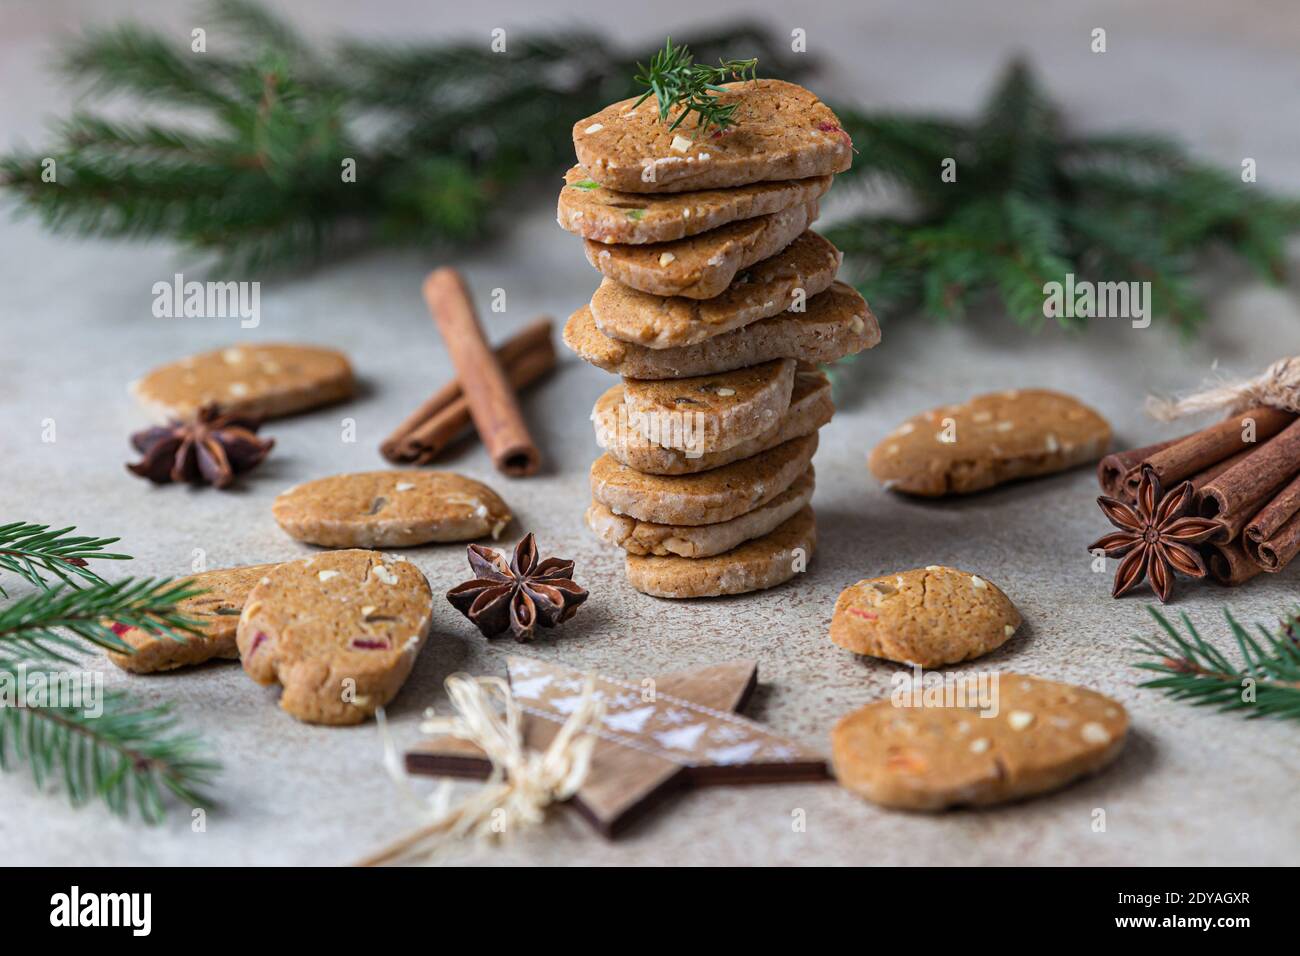 Danish spicy butter cookies with candied fruits, cinnamon sticks and anise, light background. Festive Christmas or New Year background with fir branch Stock Photo